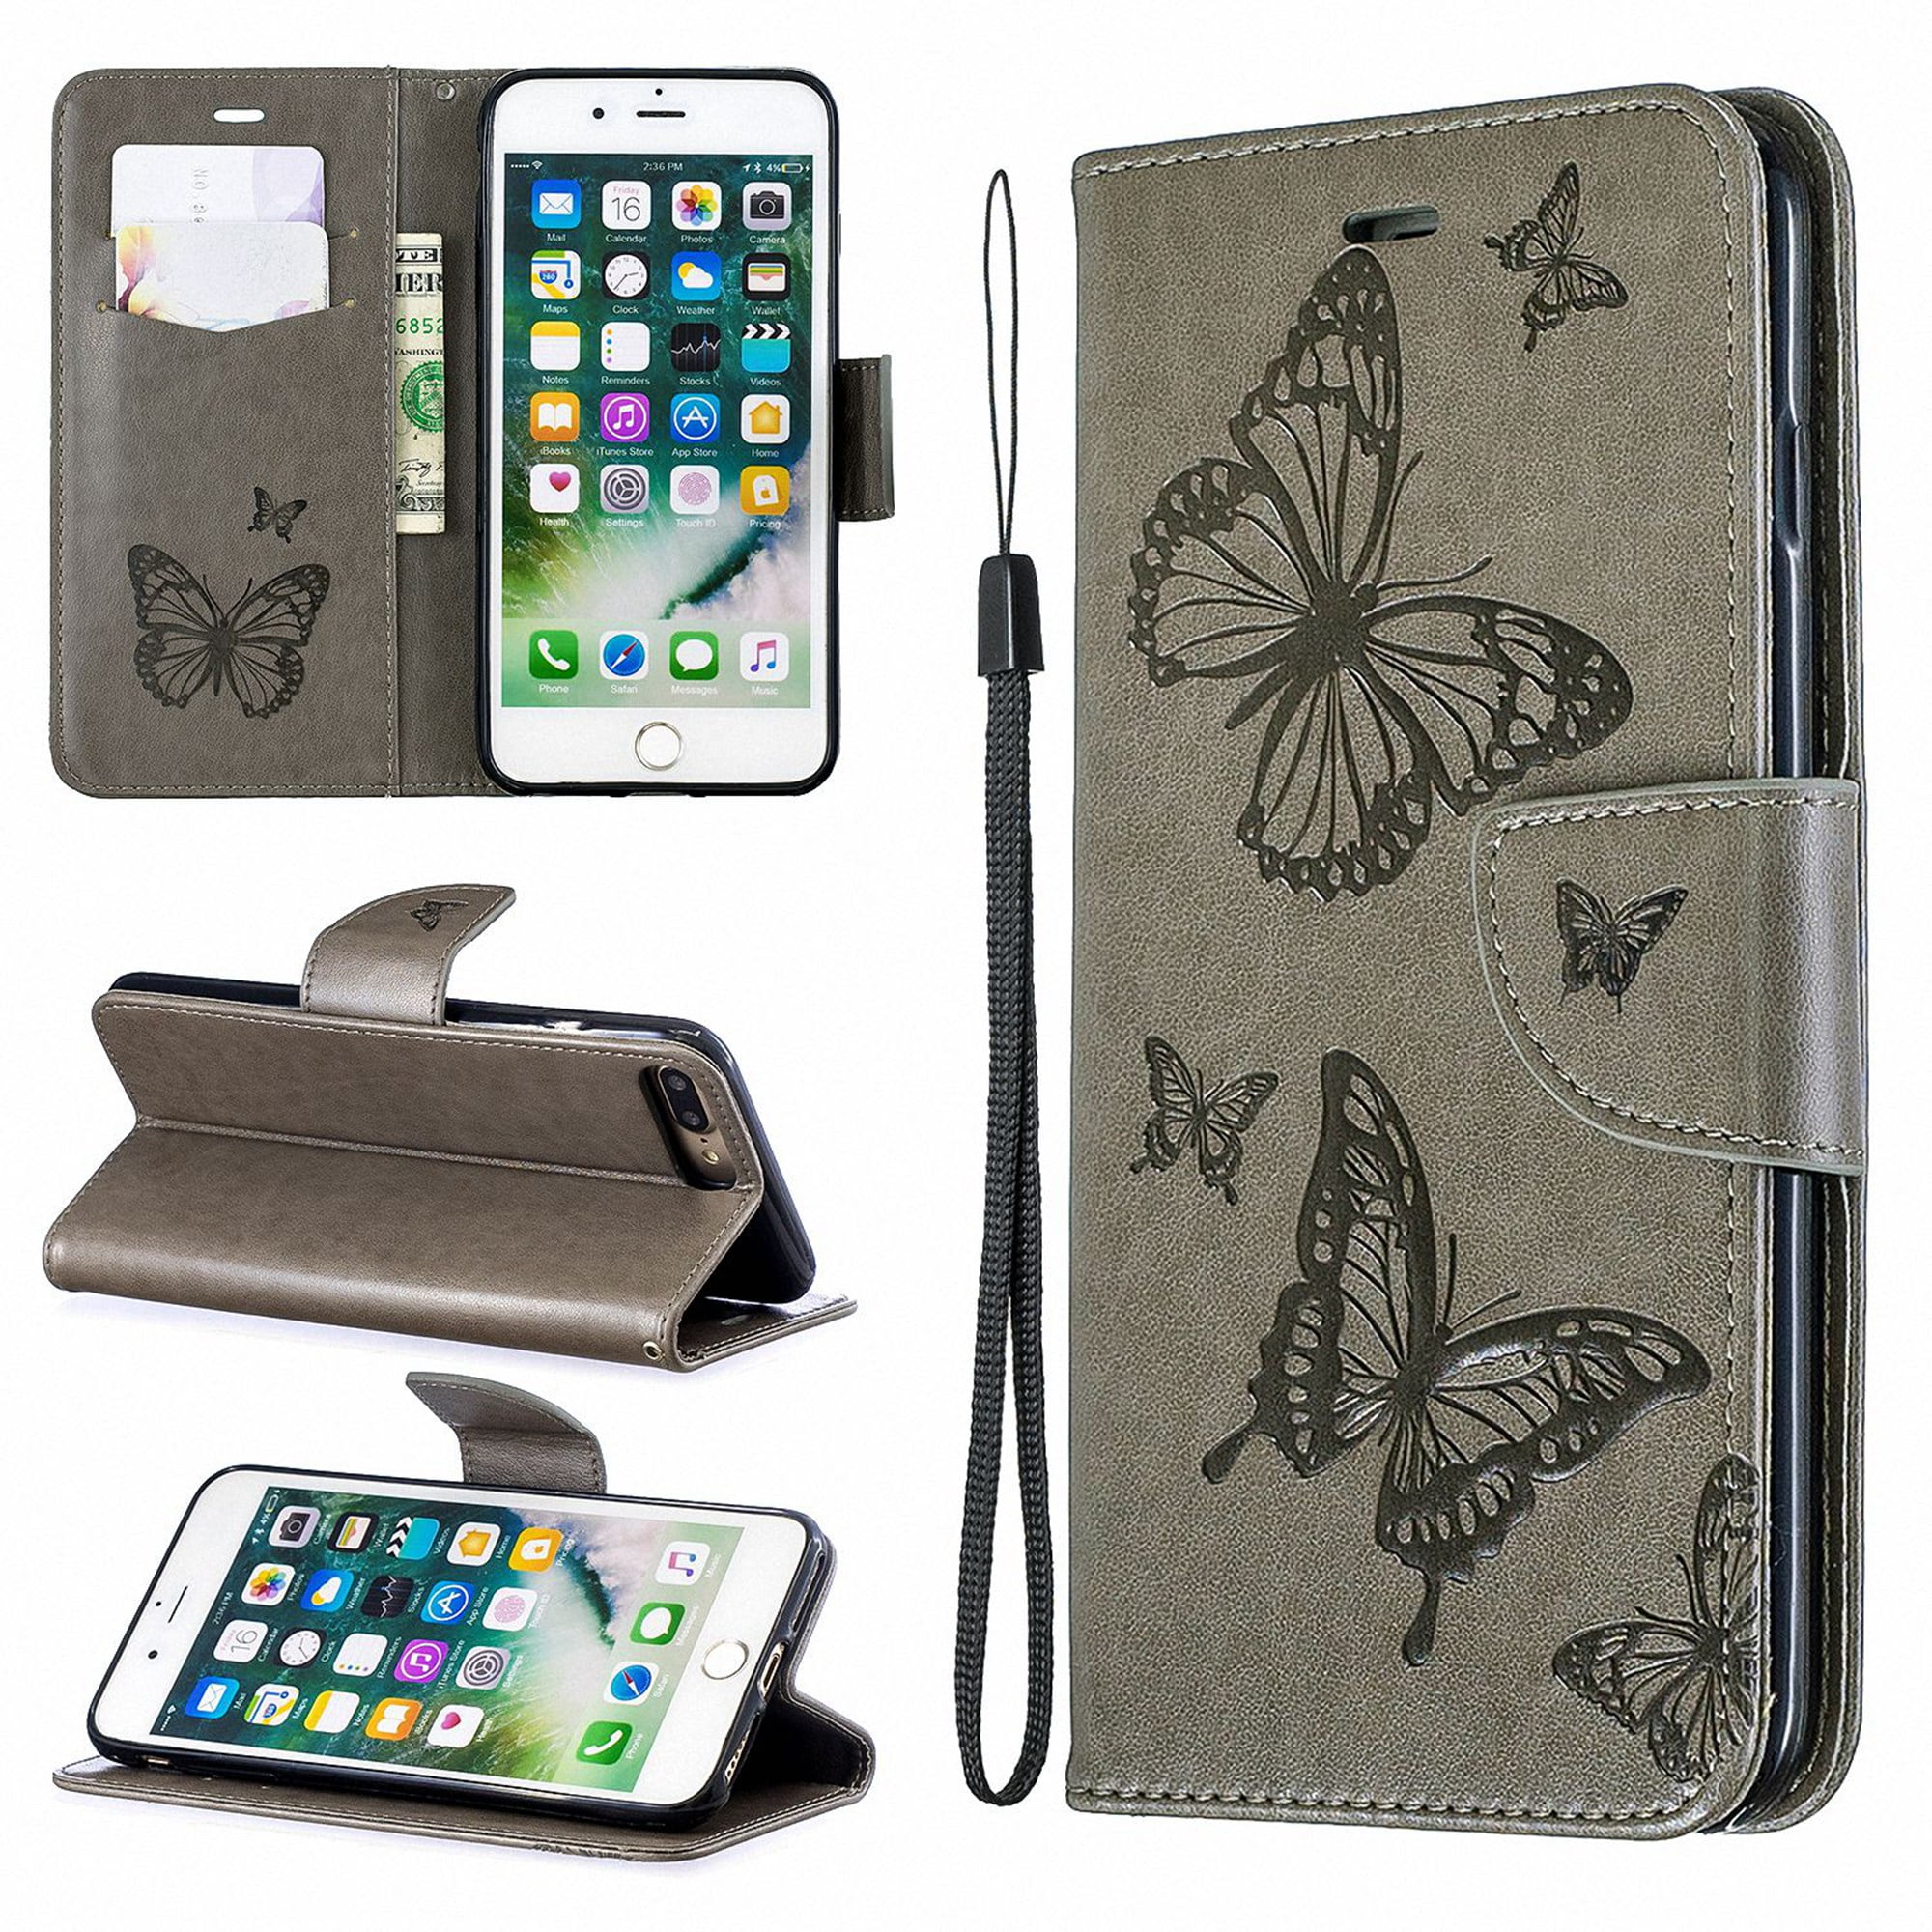 barm andrageren Uddrag iPhone 8 Plus Wallet Case, iPhone 7 Plus Case, Dteck Embossed Butterfly  Flip PU Leather Stand Wallet Case Cover For iPhone 8 Plus / 7 Plus, Gray -  Walmart.com